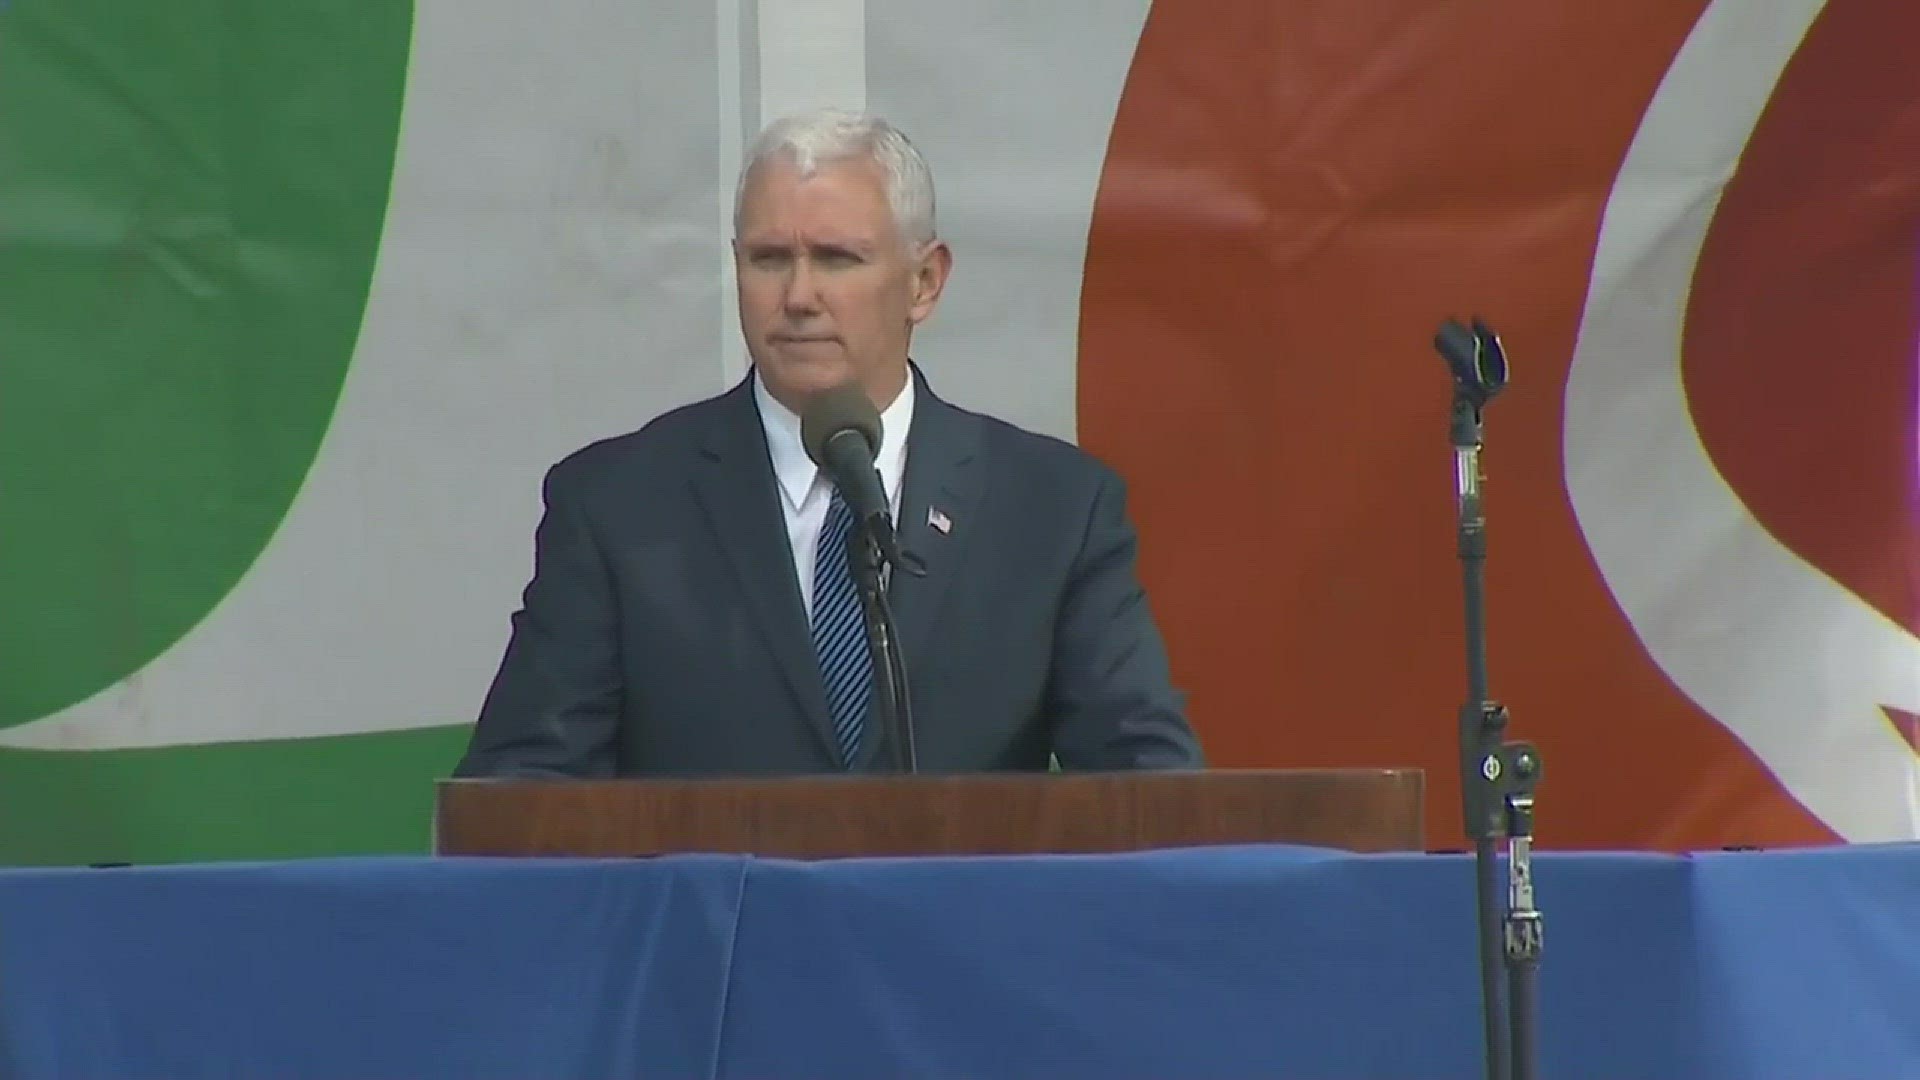 Mike Pence speaks at March for Life